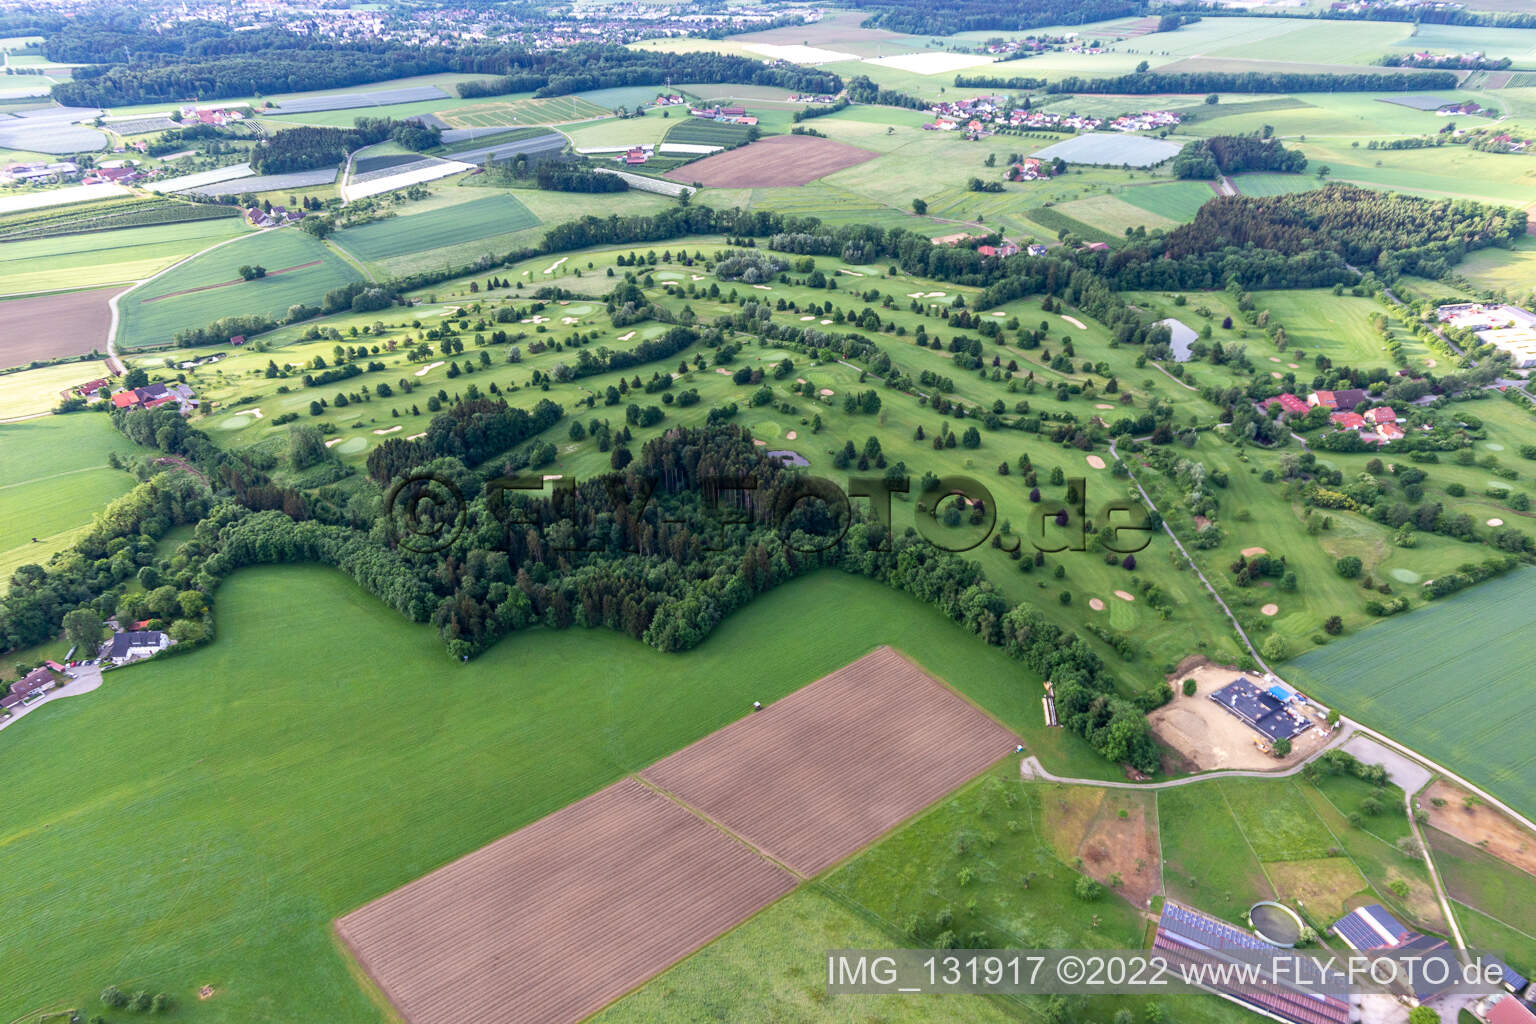 Aerial view of Golf course Ravensburg in Ravensburg in the state Baden-Wuerttemberg, Germany